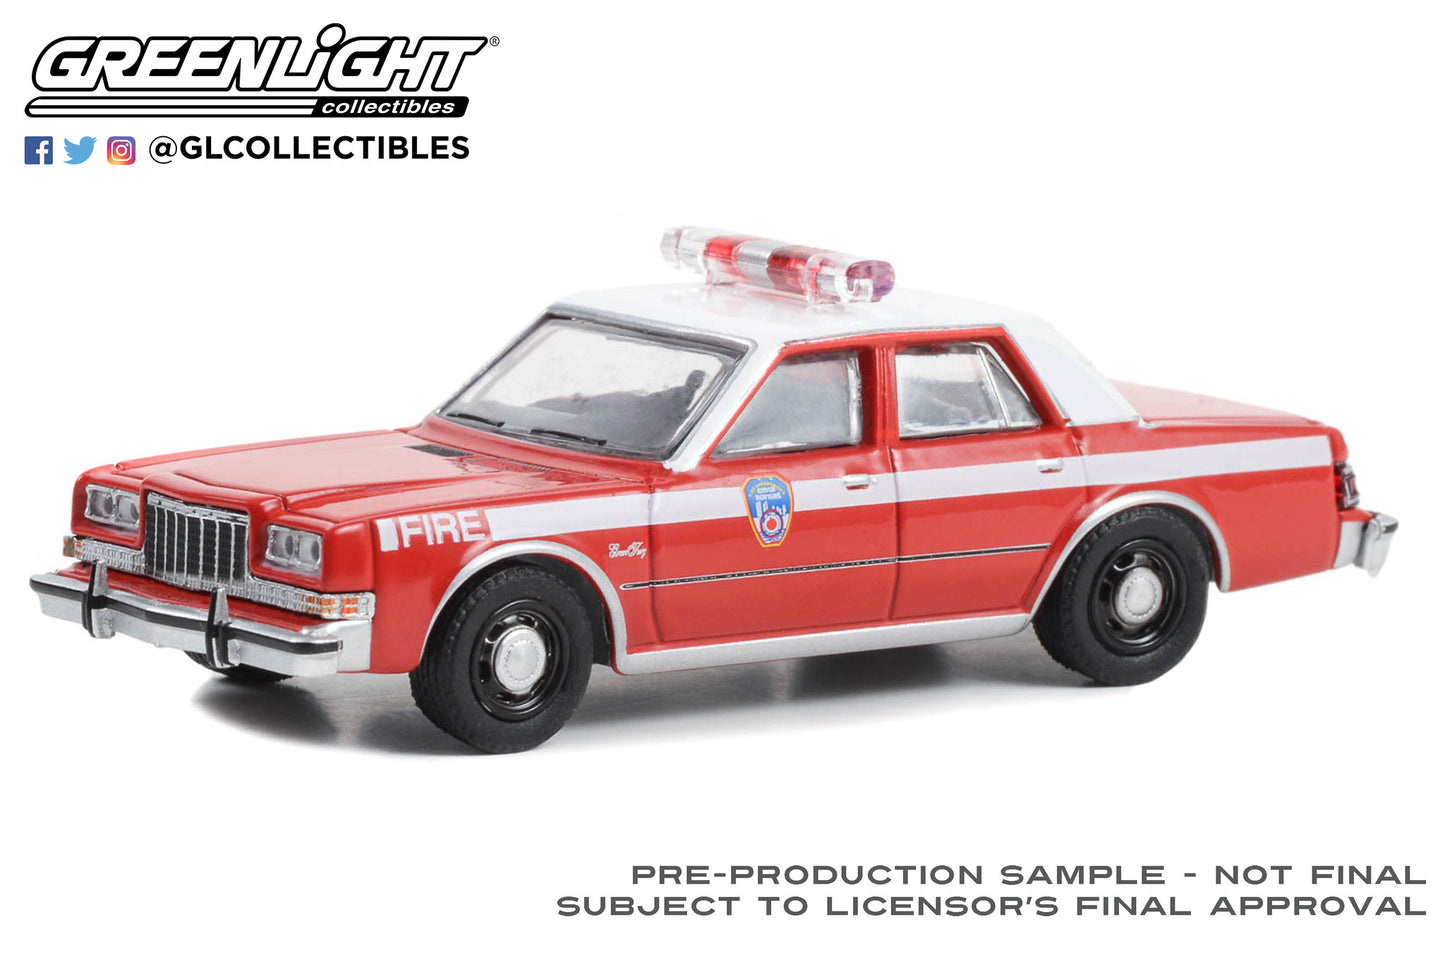 GreenLight 1:64 Fire & Rescue Series 4 - 1985 Plymouth Gran Fury - FDNY (The Official Fire Department City of New York) Division Chief 5 67050-C